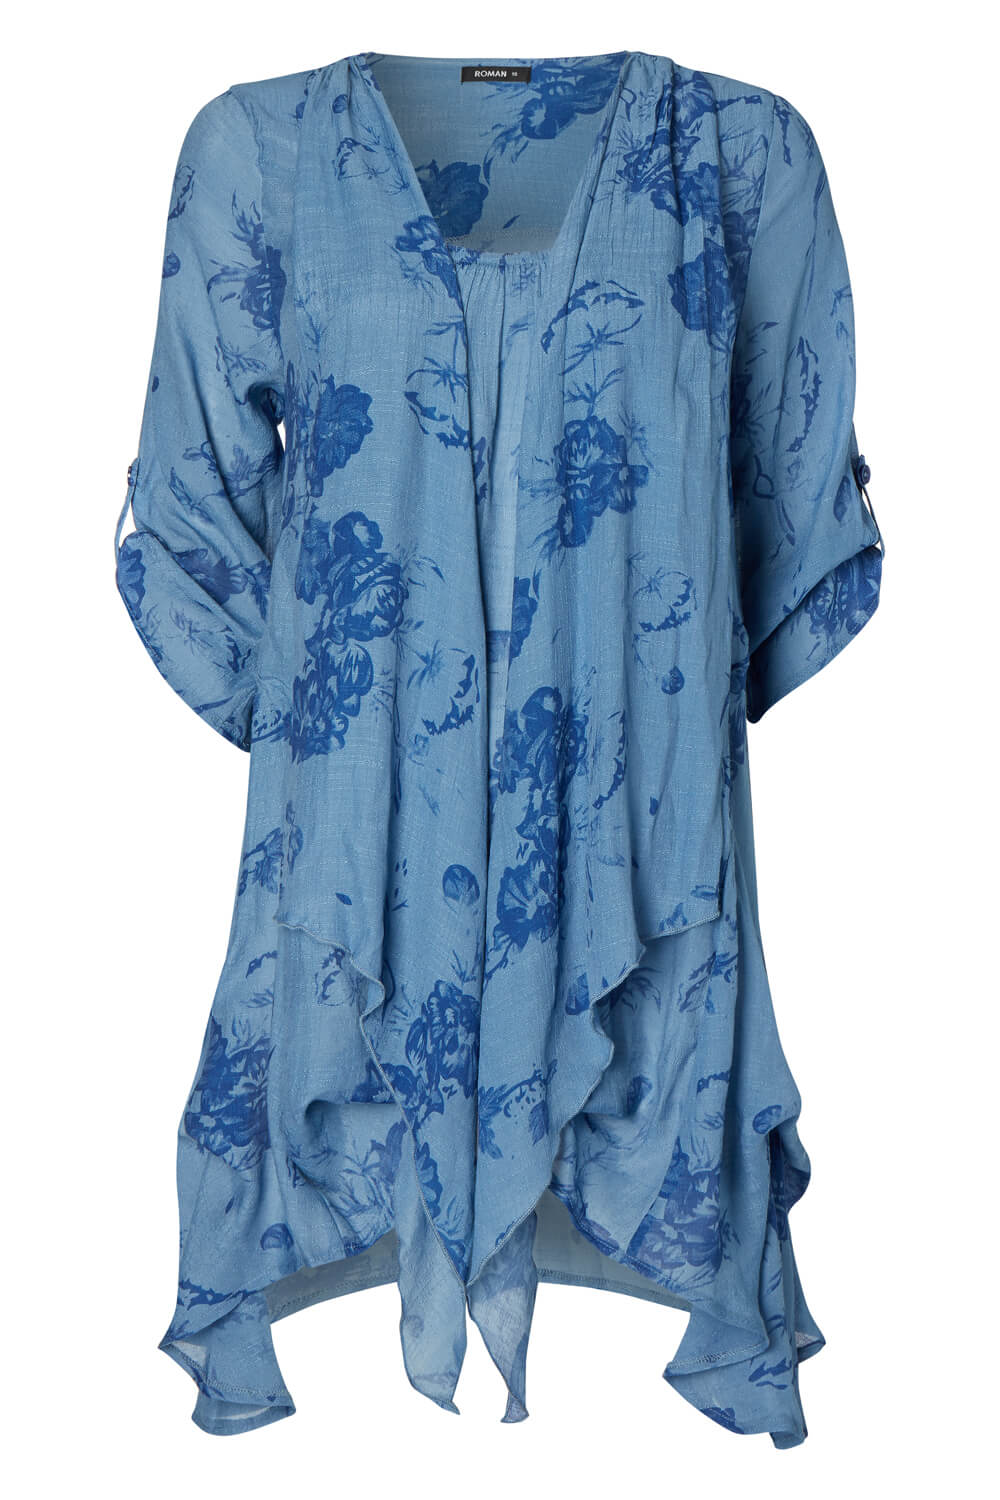 Blue Floral Print Crinkle Tunic, Image 4 of 4